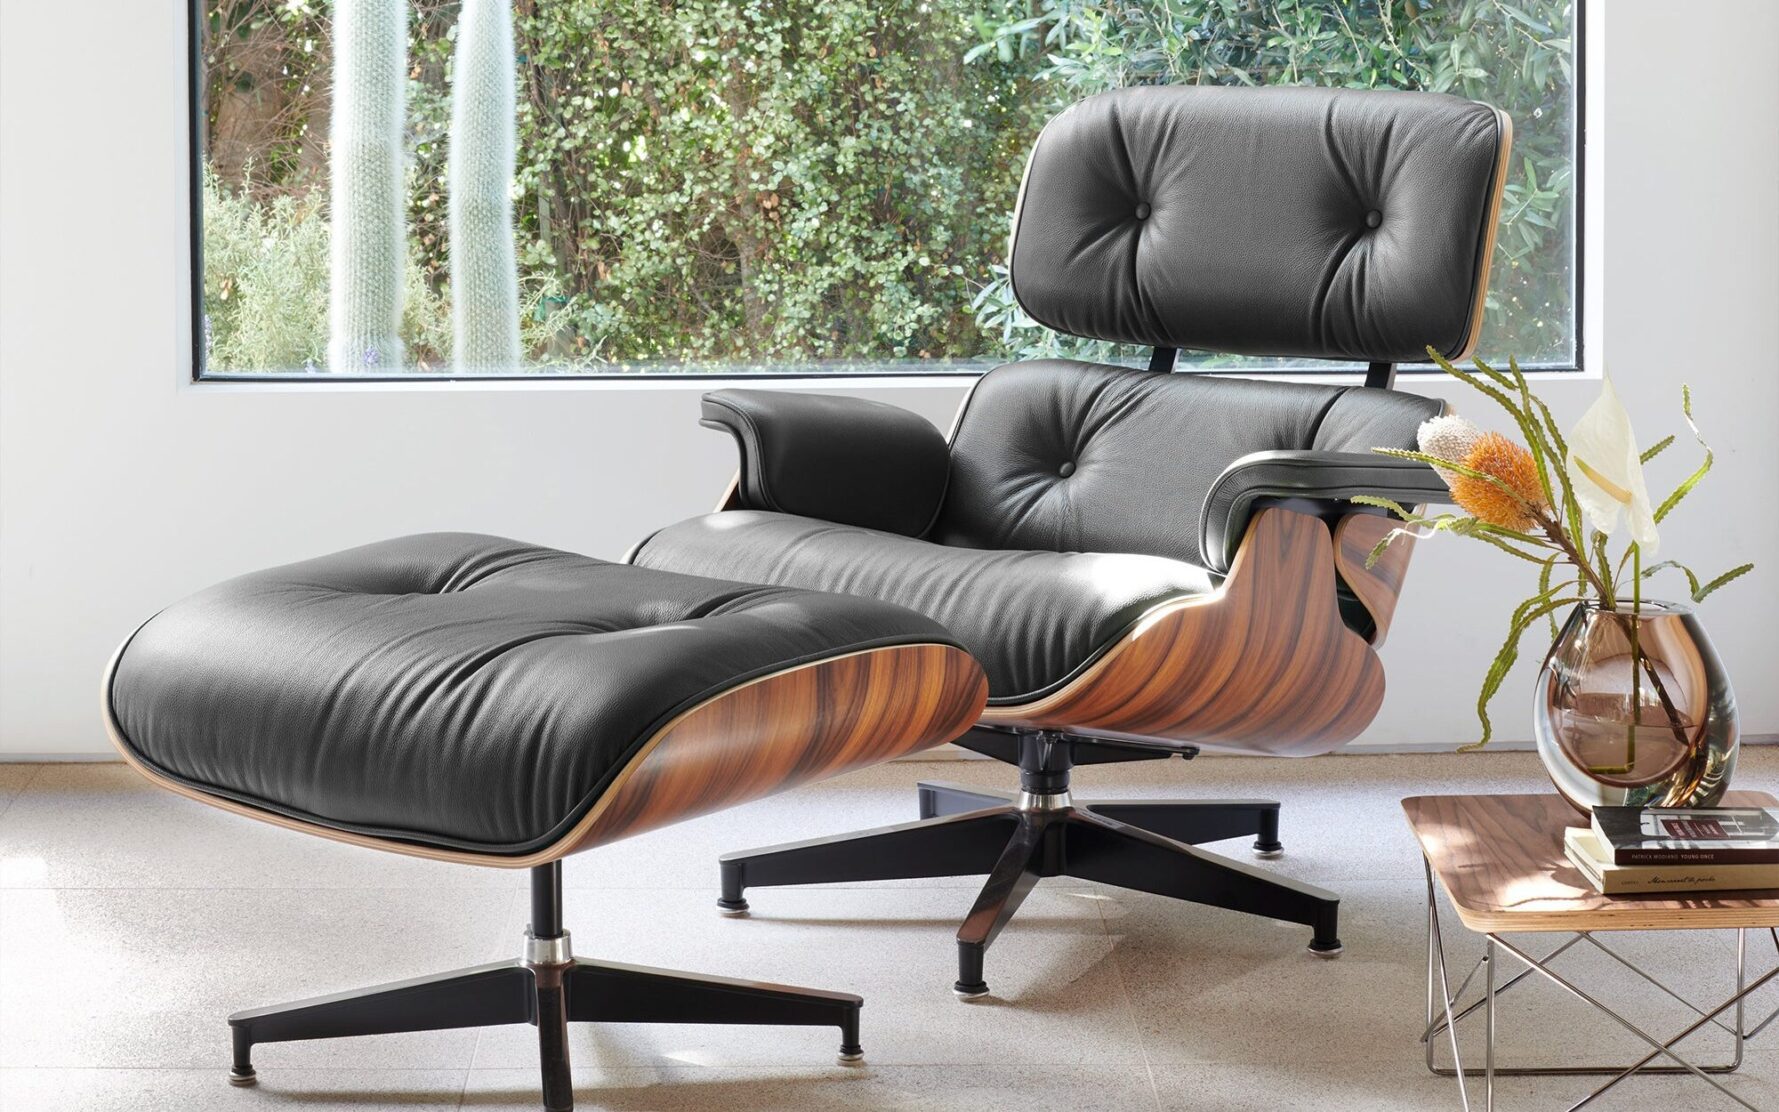 ClassicLoungeChair BlackPalisander 10 edited scaled